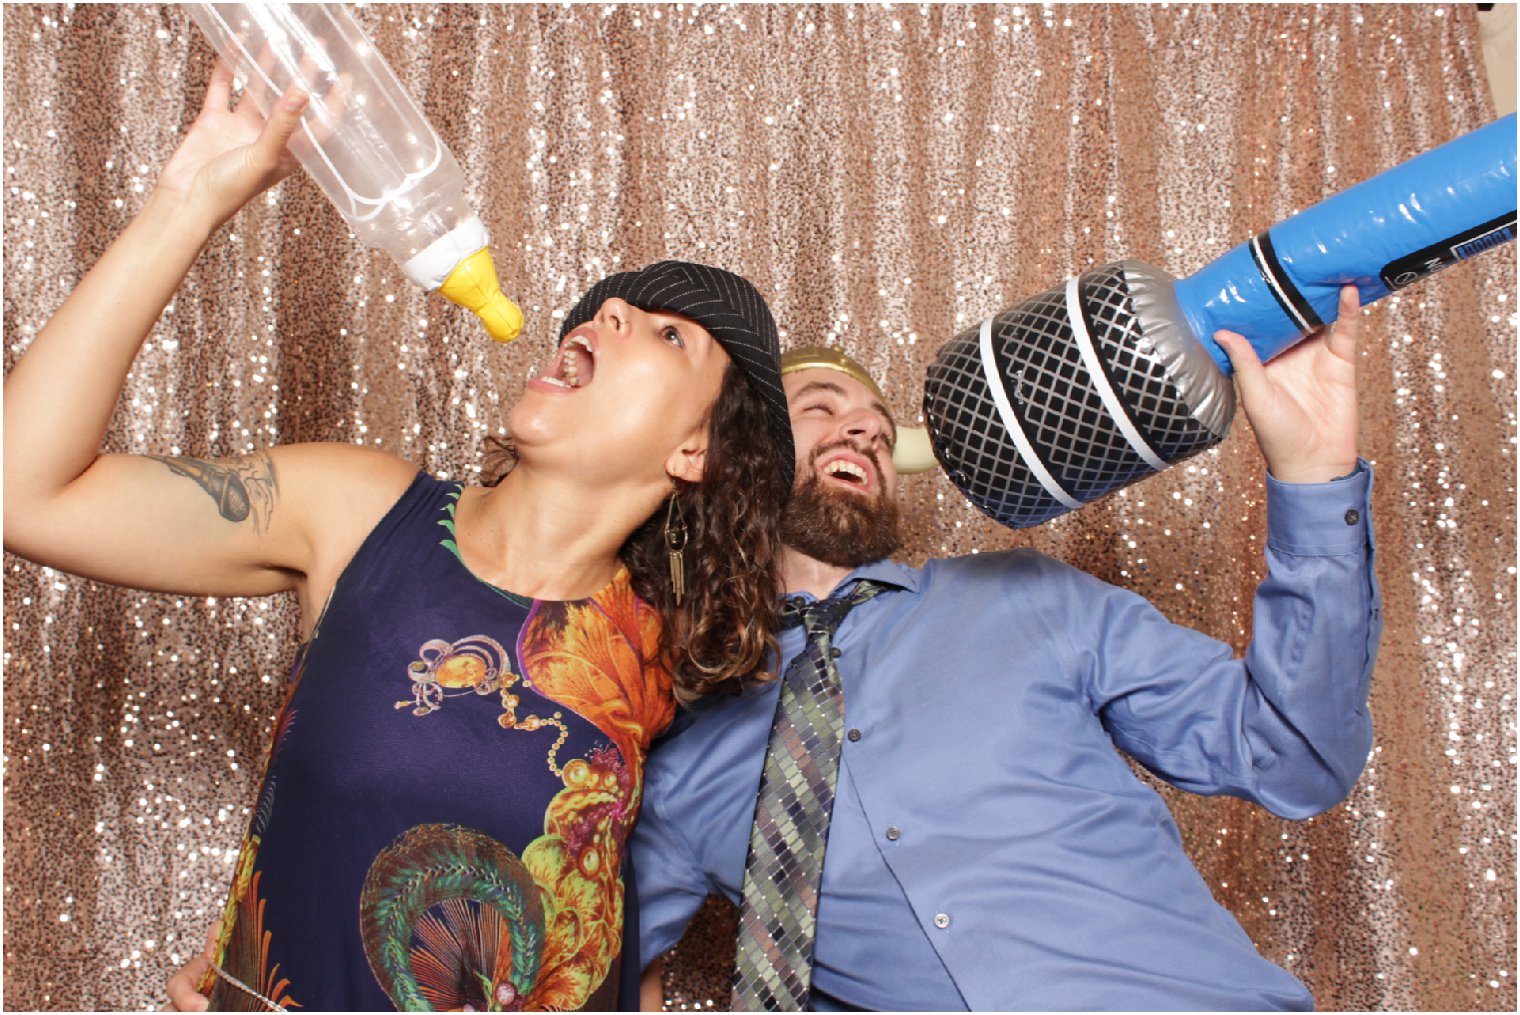 Couple having fun in the photo booth